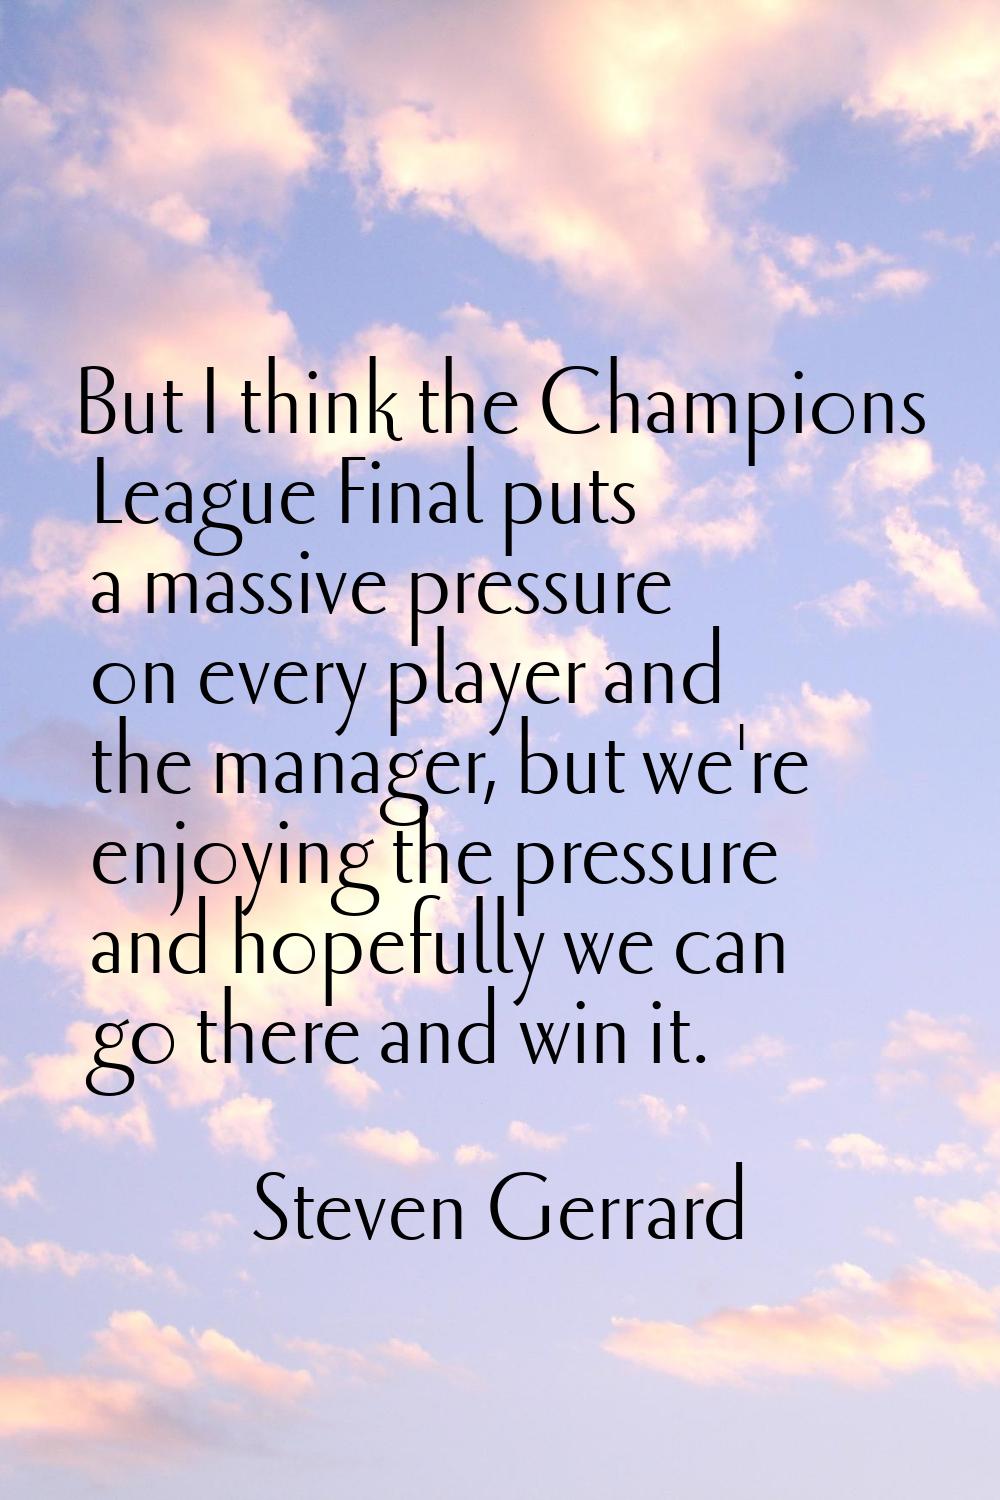 But I think the Champions League Final puts a massive pressure on every player and the manager, but